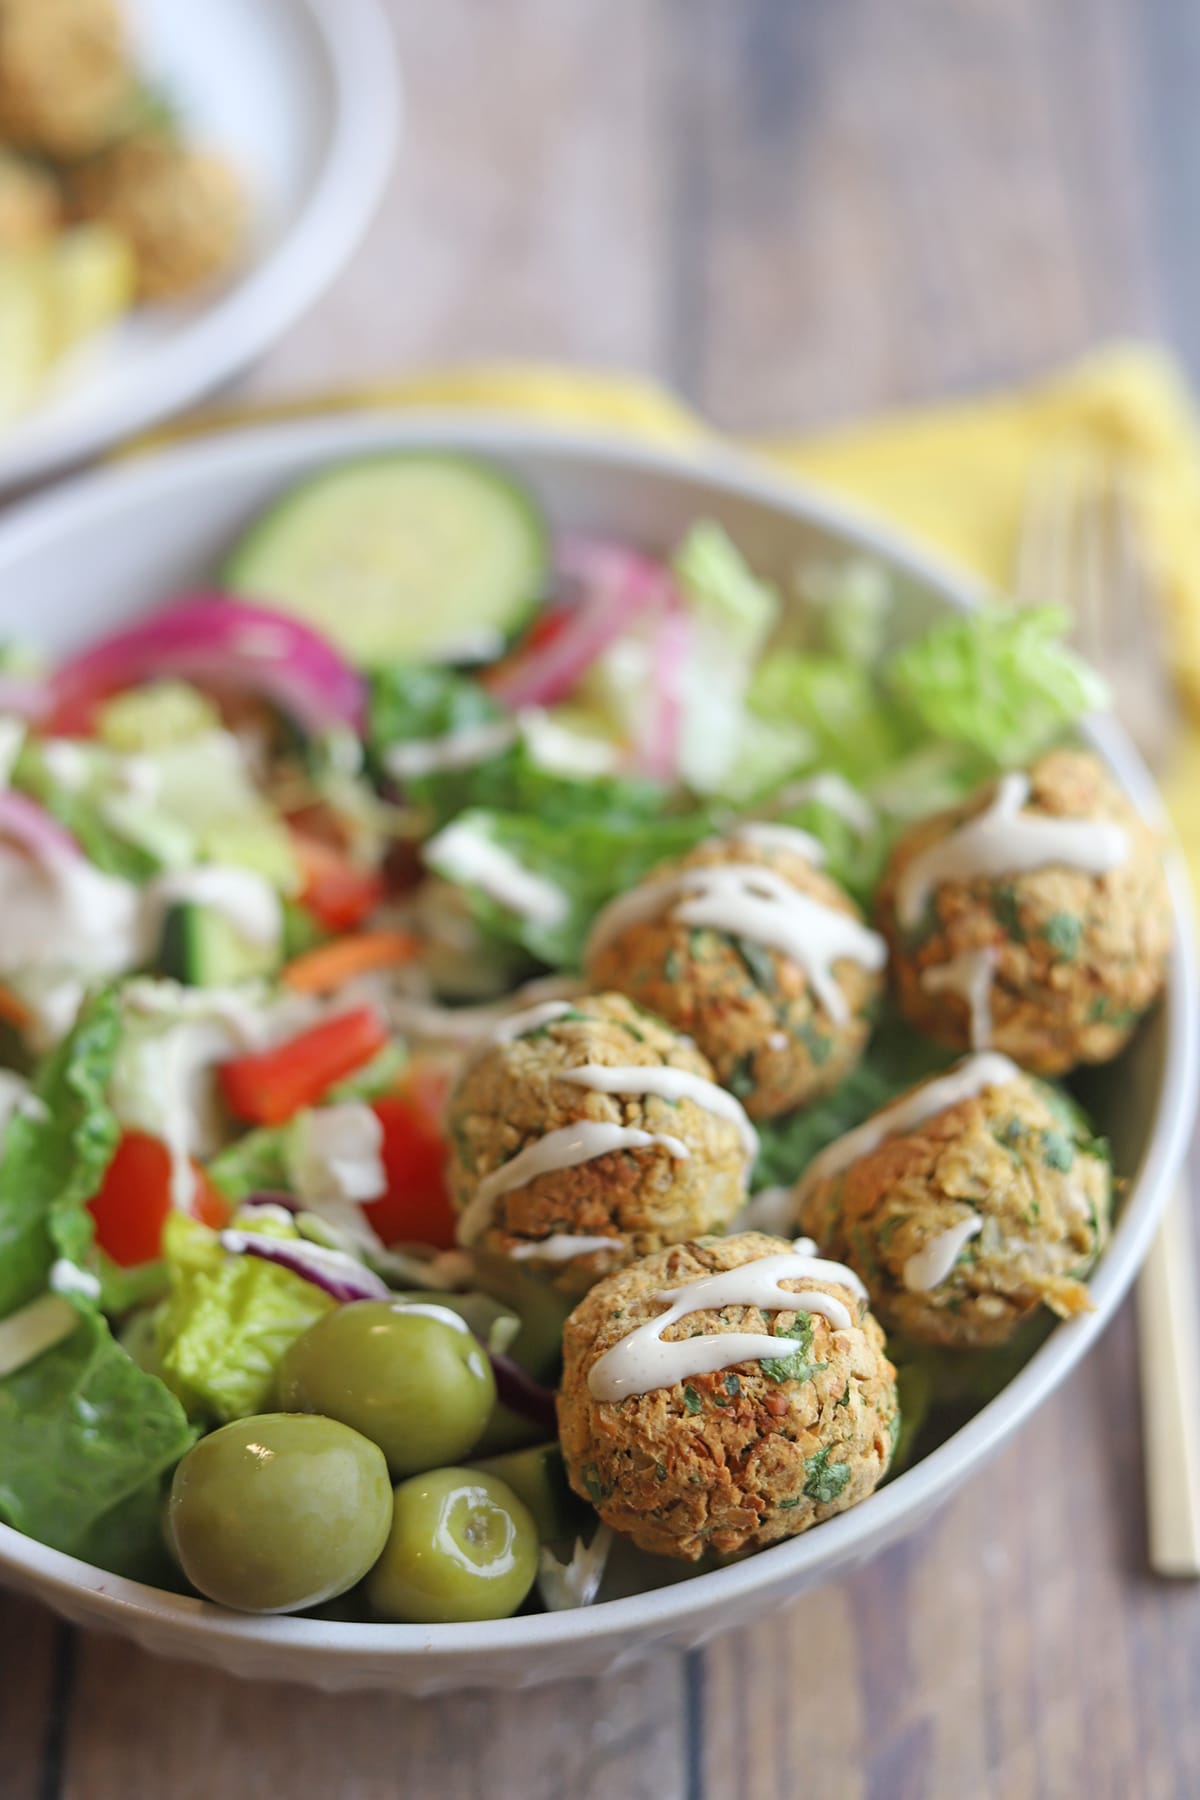 Falafel drizzled with tahini dressing on salad.